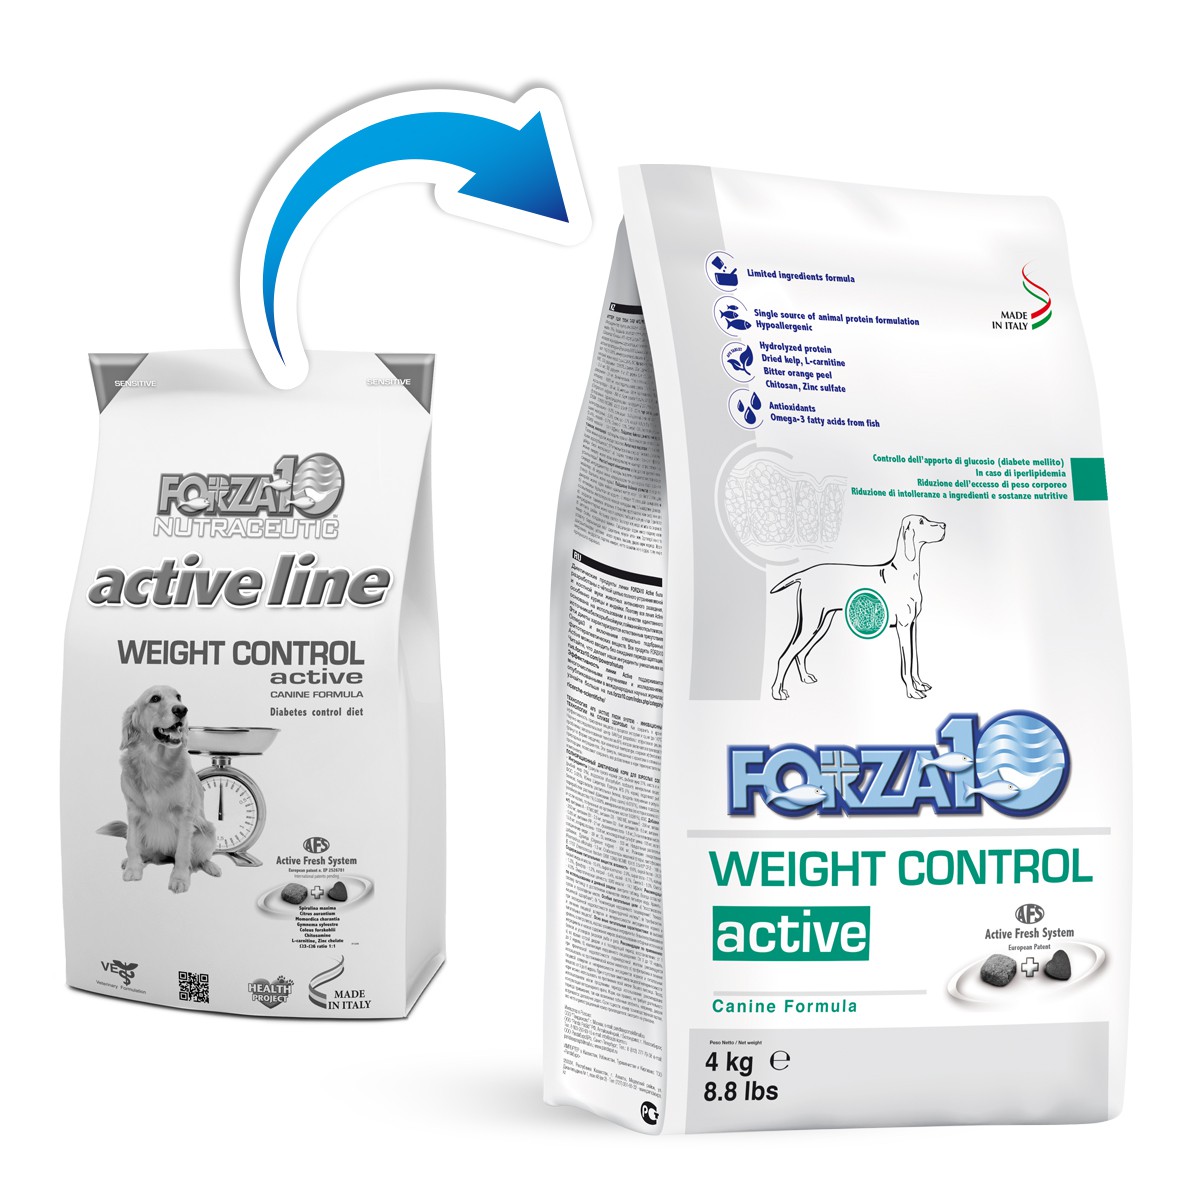 FORZA 10 CANE WEIGHT CONTROL ACTIVE 4KG